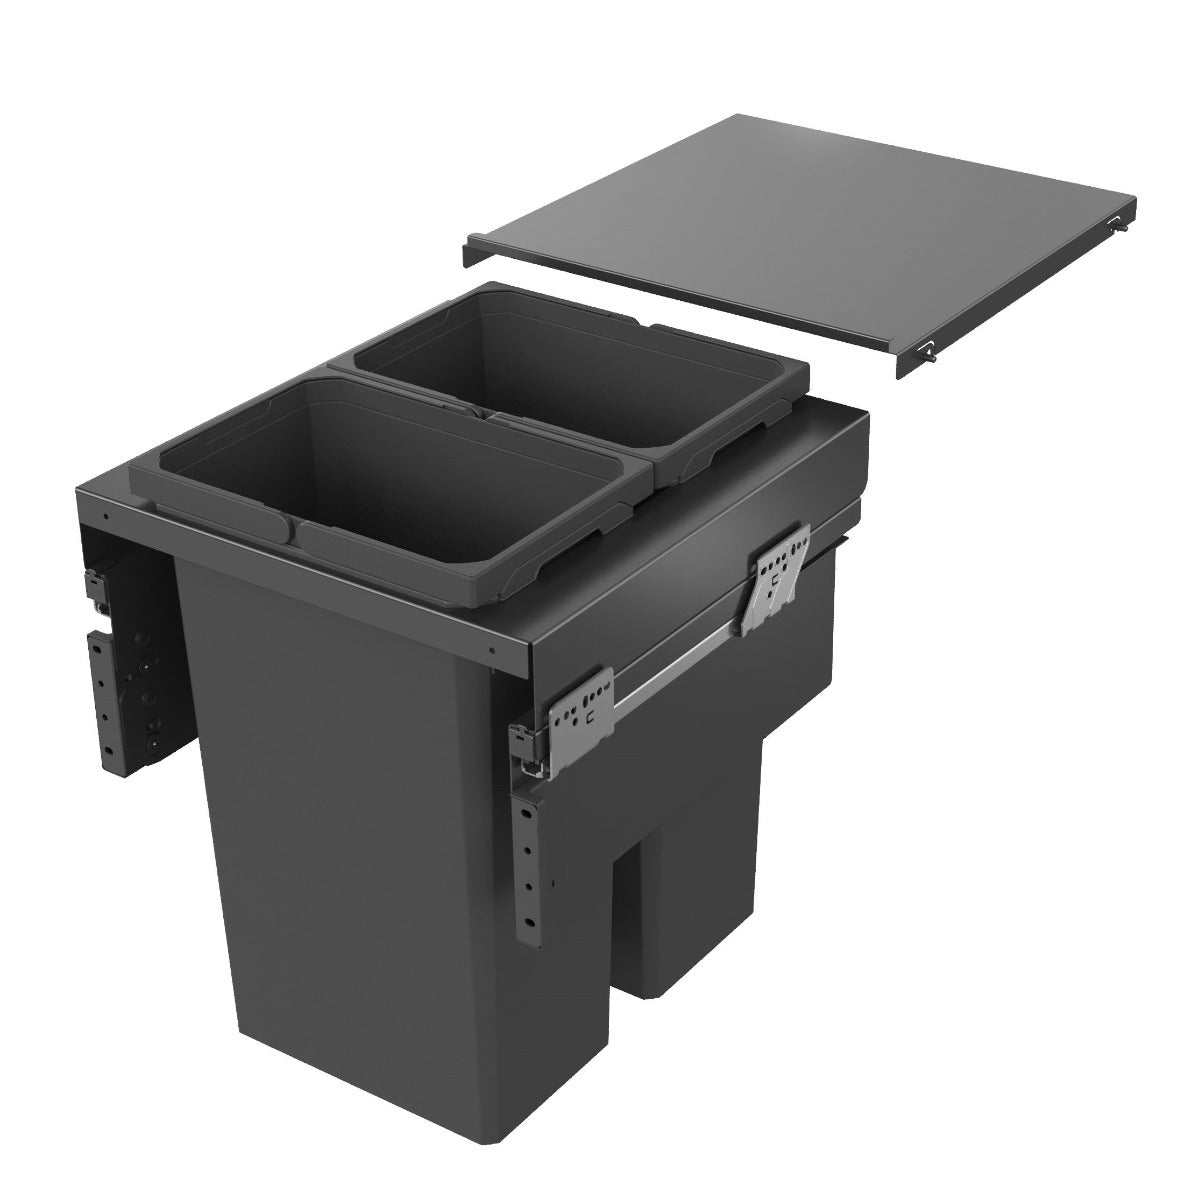 A well-designed kitchen cabinet bin from Vauth-Sage with two compartments, providing 64 litres of waste and recycling space.